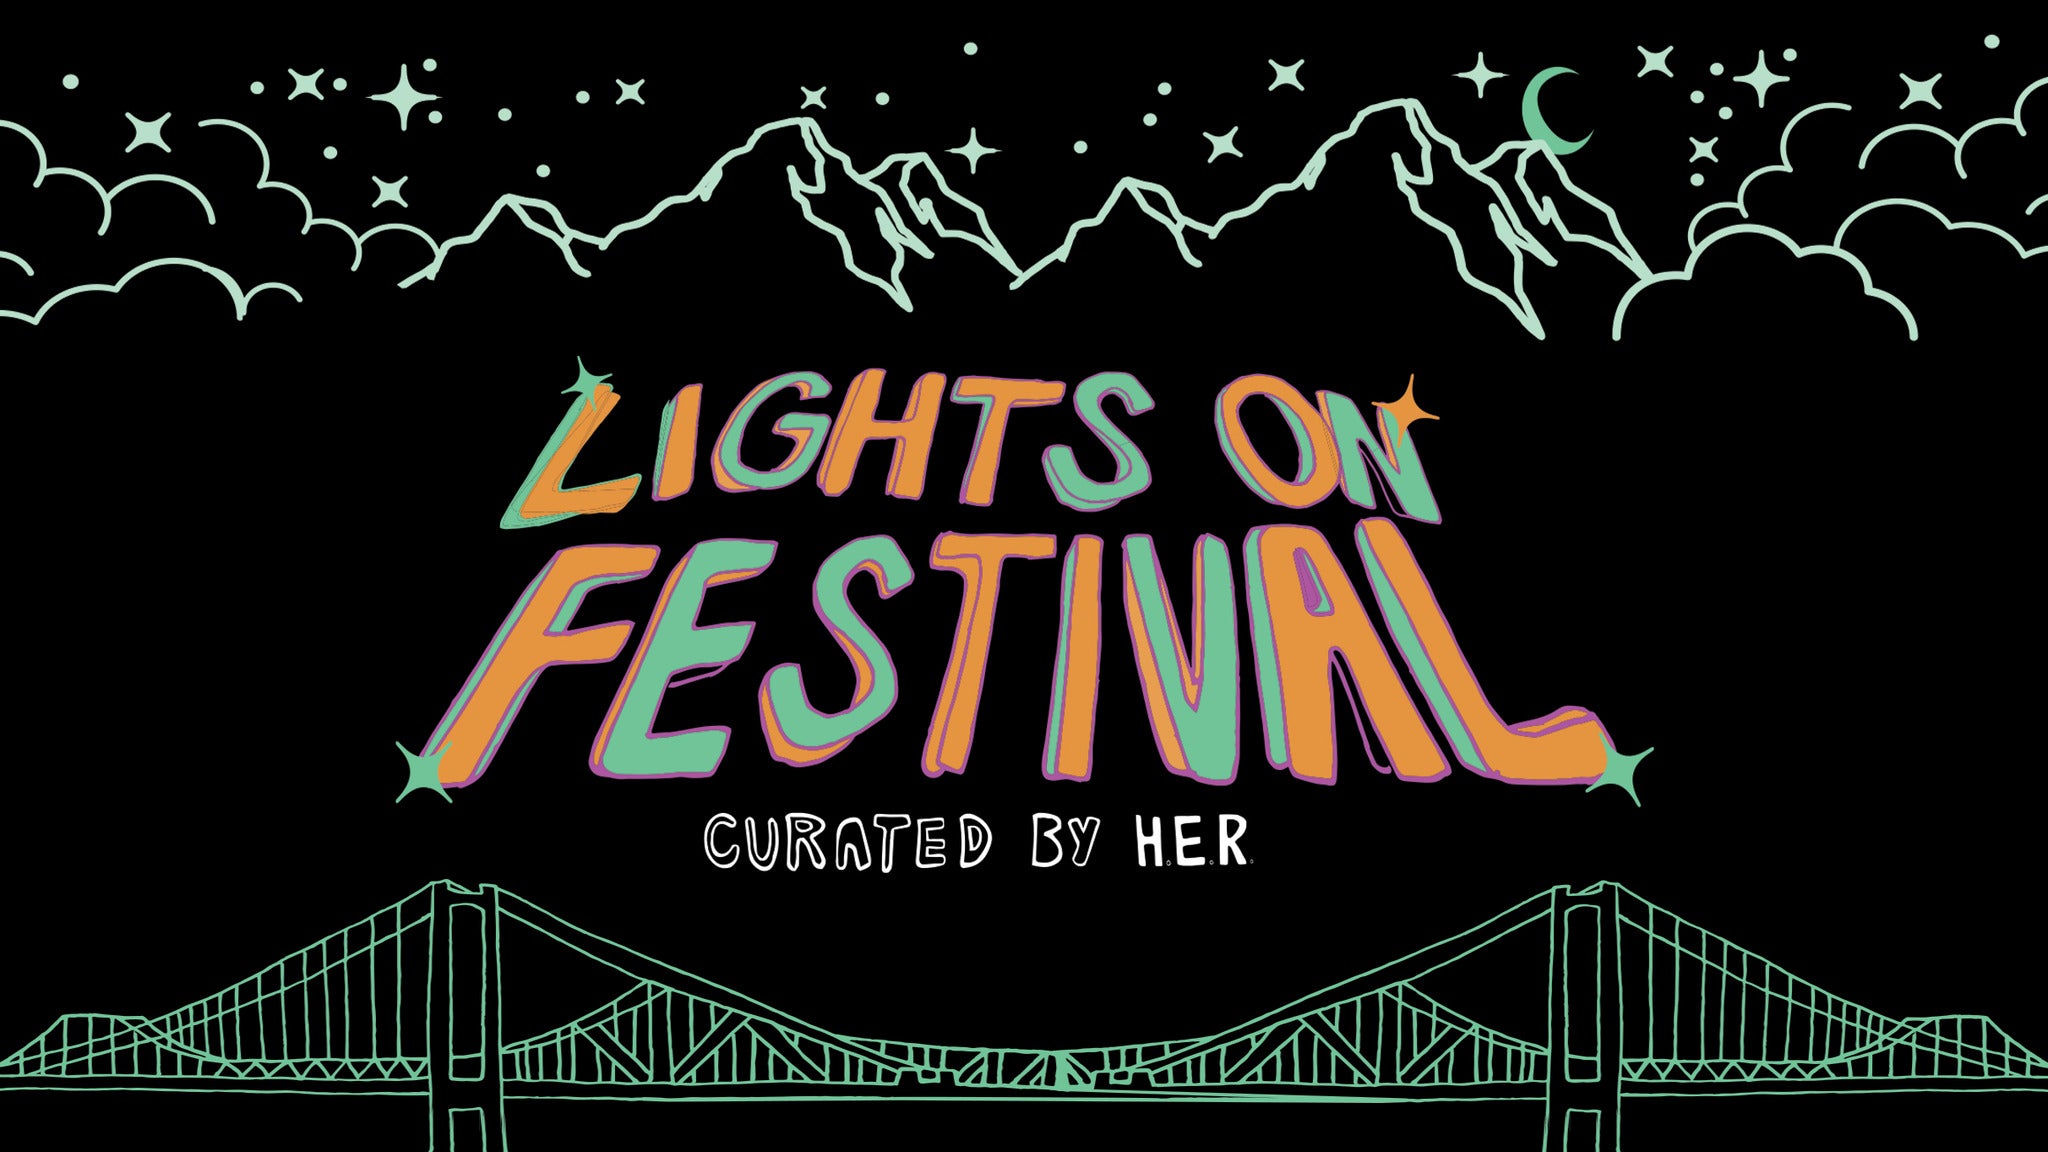 Lights On Fest: Brooklyn - 2 DAY PASS in Brooklyn promo photo for Venue presale offer code